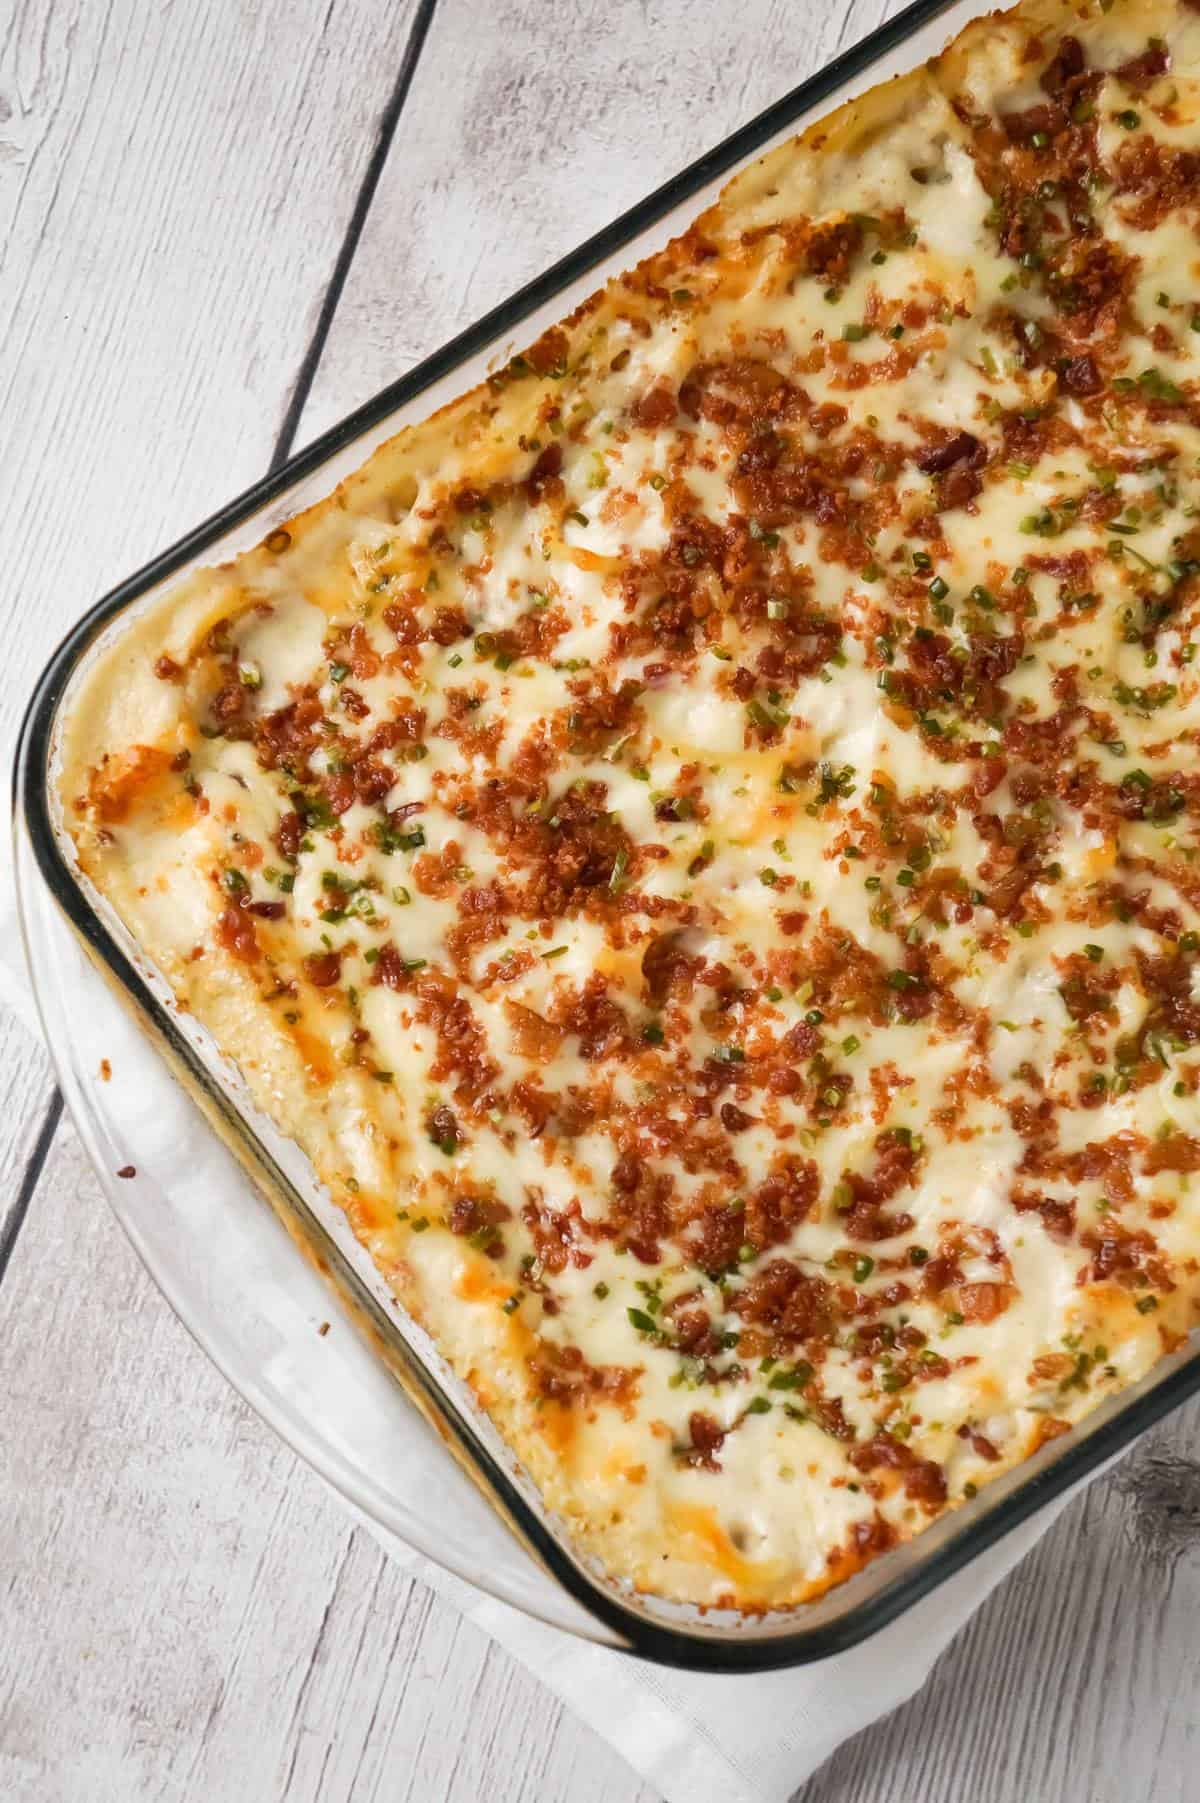 Bacon Cream Cheese Baked Spaghetti is a delicious pasta recipe loaded with crumbled bacon, Philadelphia Whipped Chive cream cheese and mozzarella cheese.